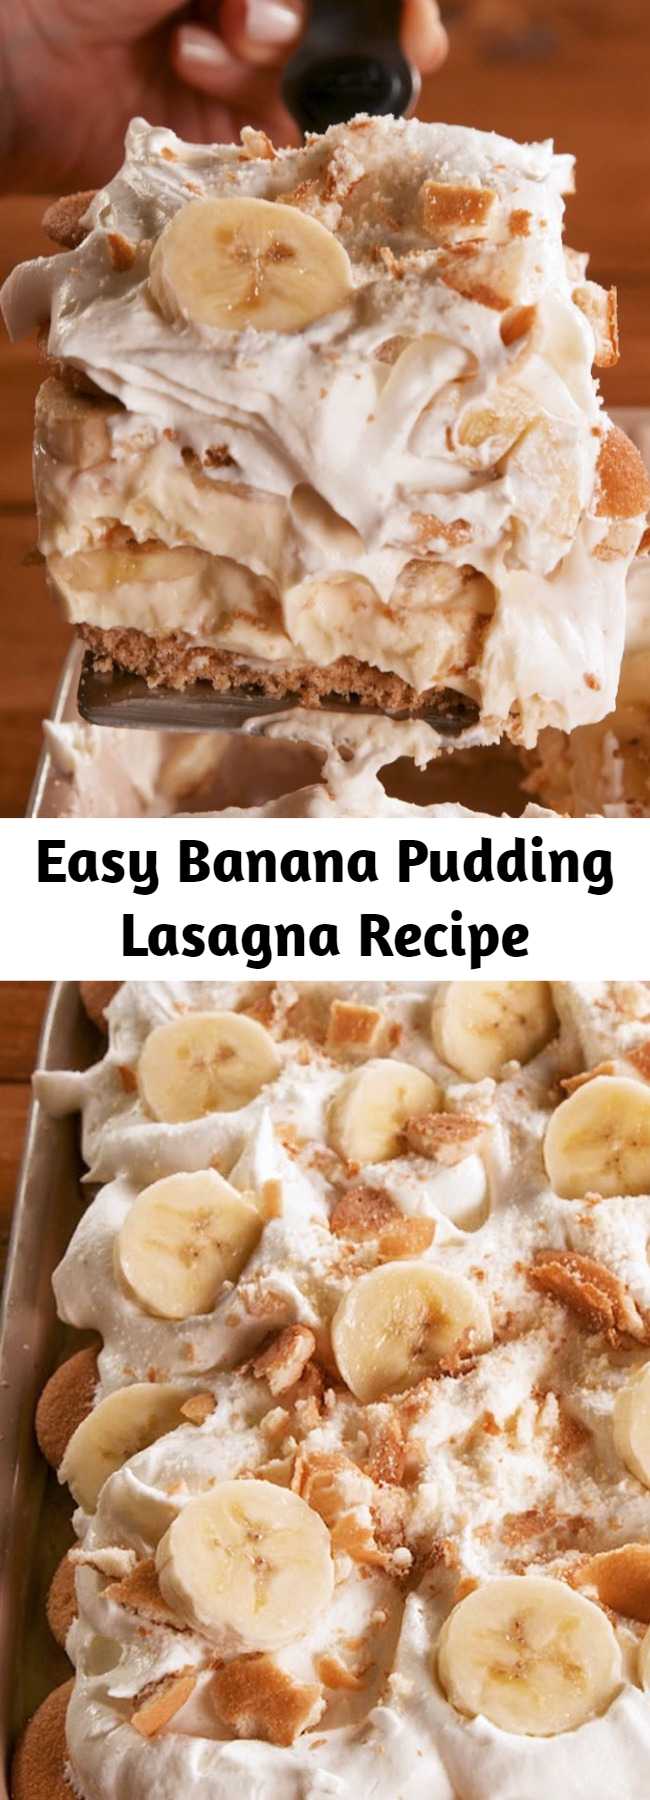 Easy Banana Pudding Lasagna Recipe - Banana Pudding Lasagna is a fun way to jazz up the flavors from the classic dessert. #recipe #easy #easyrecipes #banana #pudding #lasagna #dessert #fruit #whippedcream #nobake